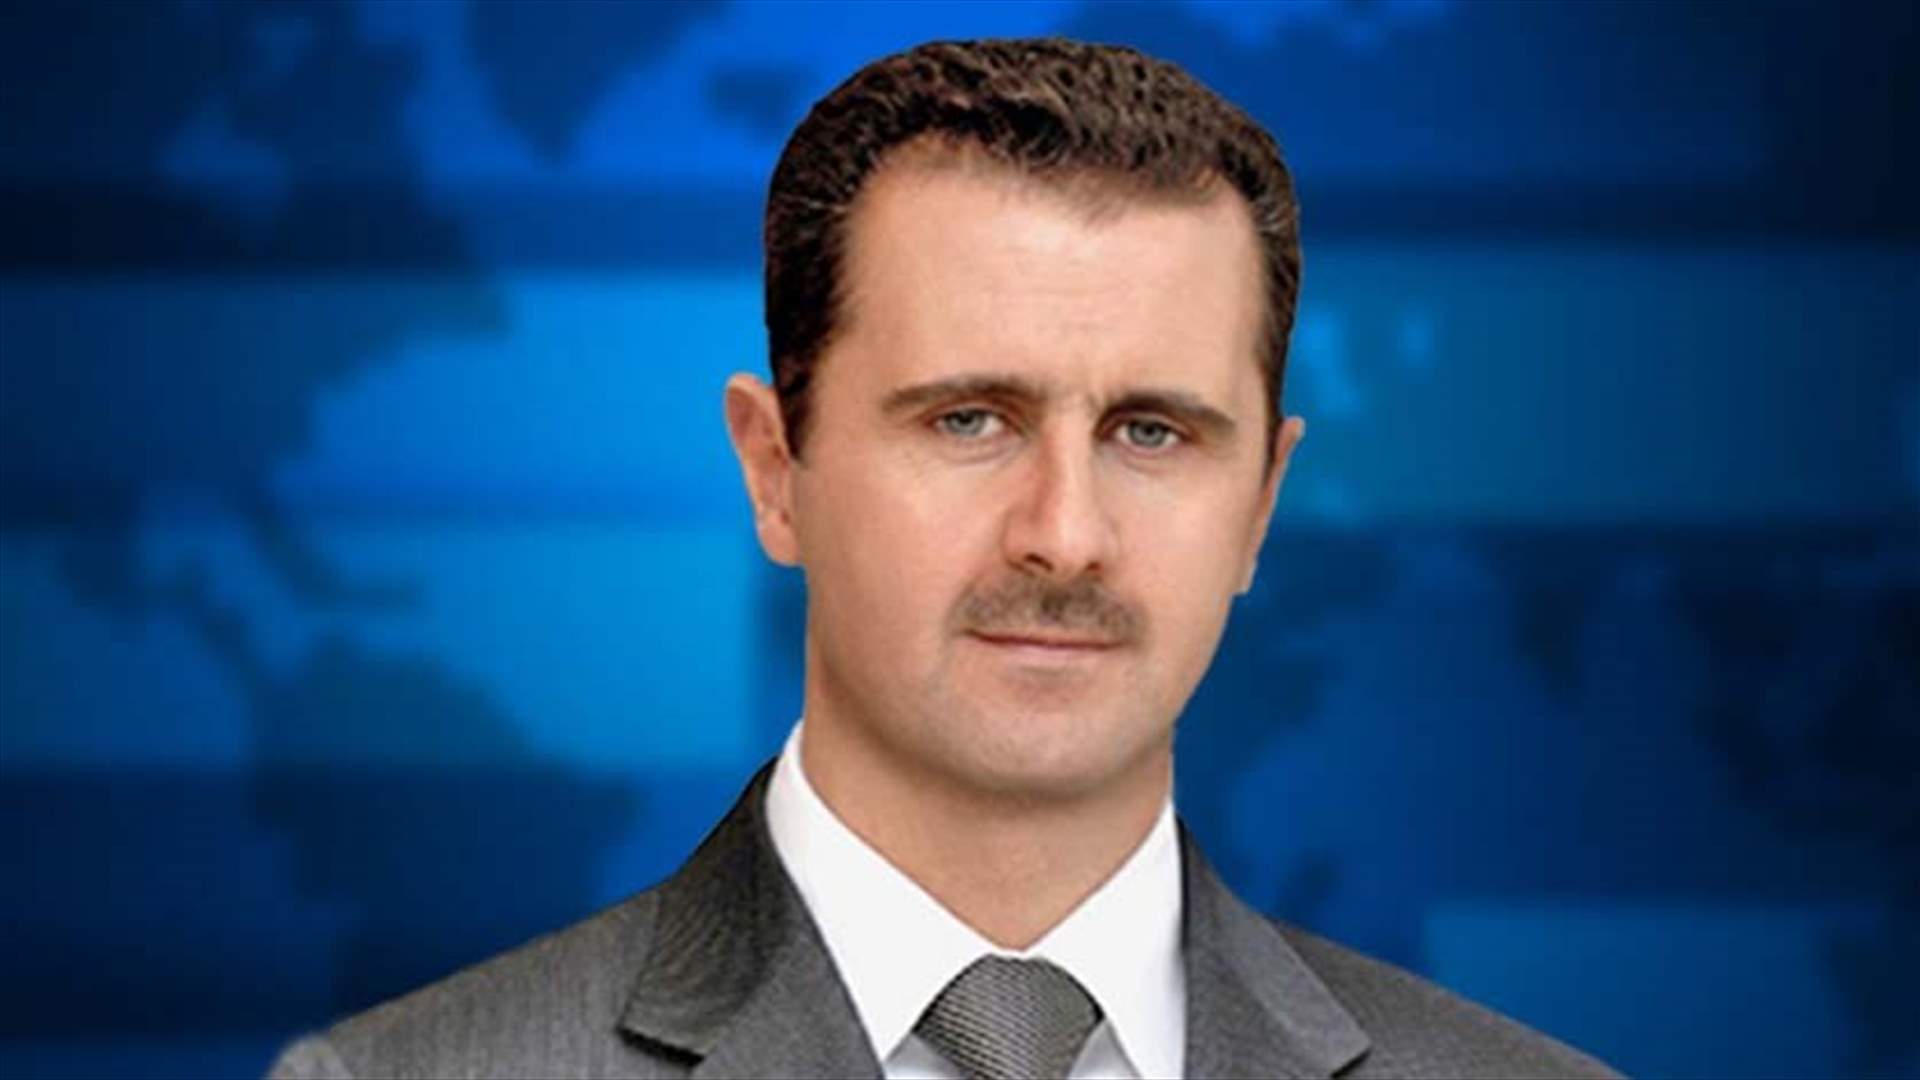 Assad tells Putin his government will help with Syria ceasefire -Ifax